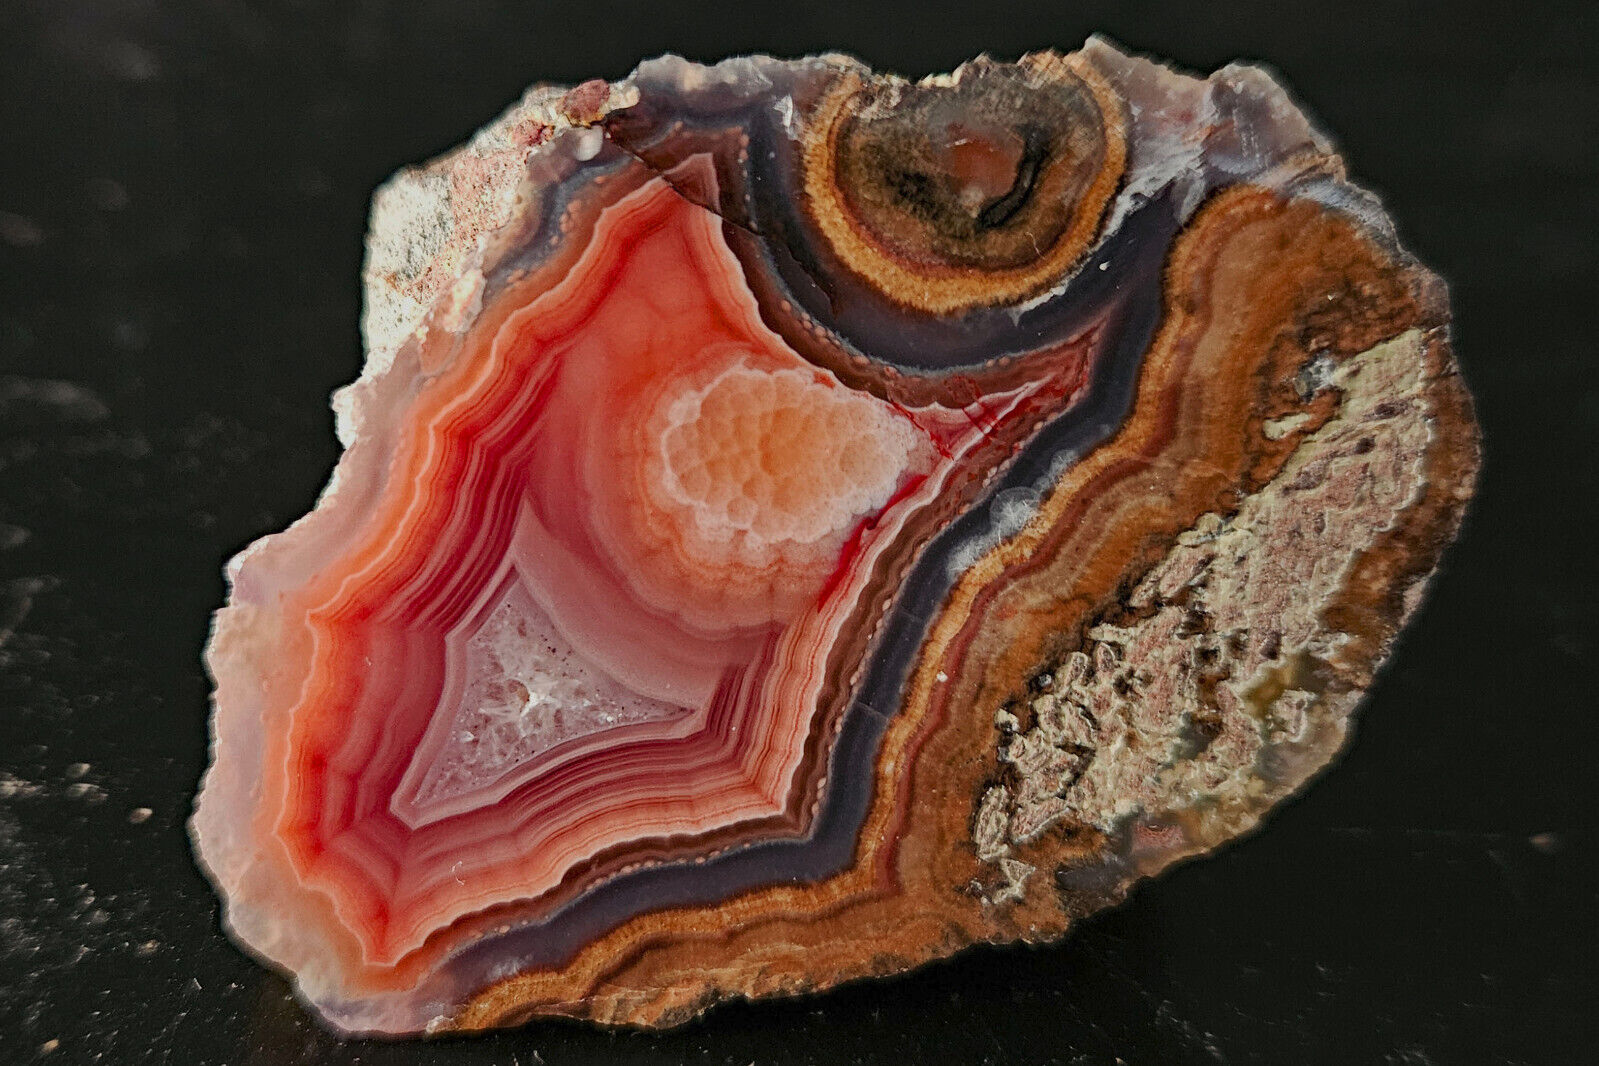 BEAUTIFUL Polished Laguna Agate with Sagenite Collector Specimen, Mexico